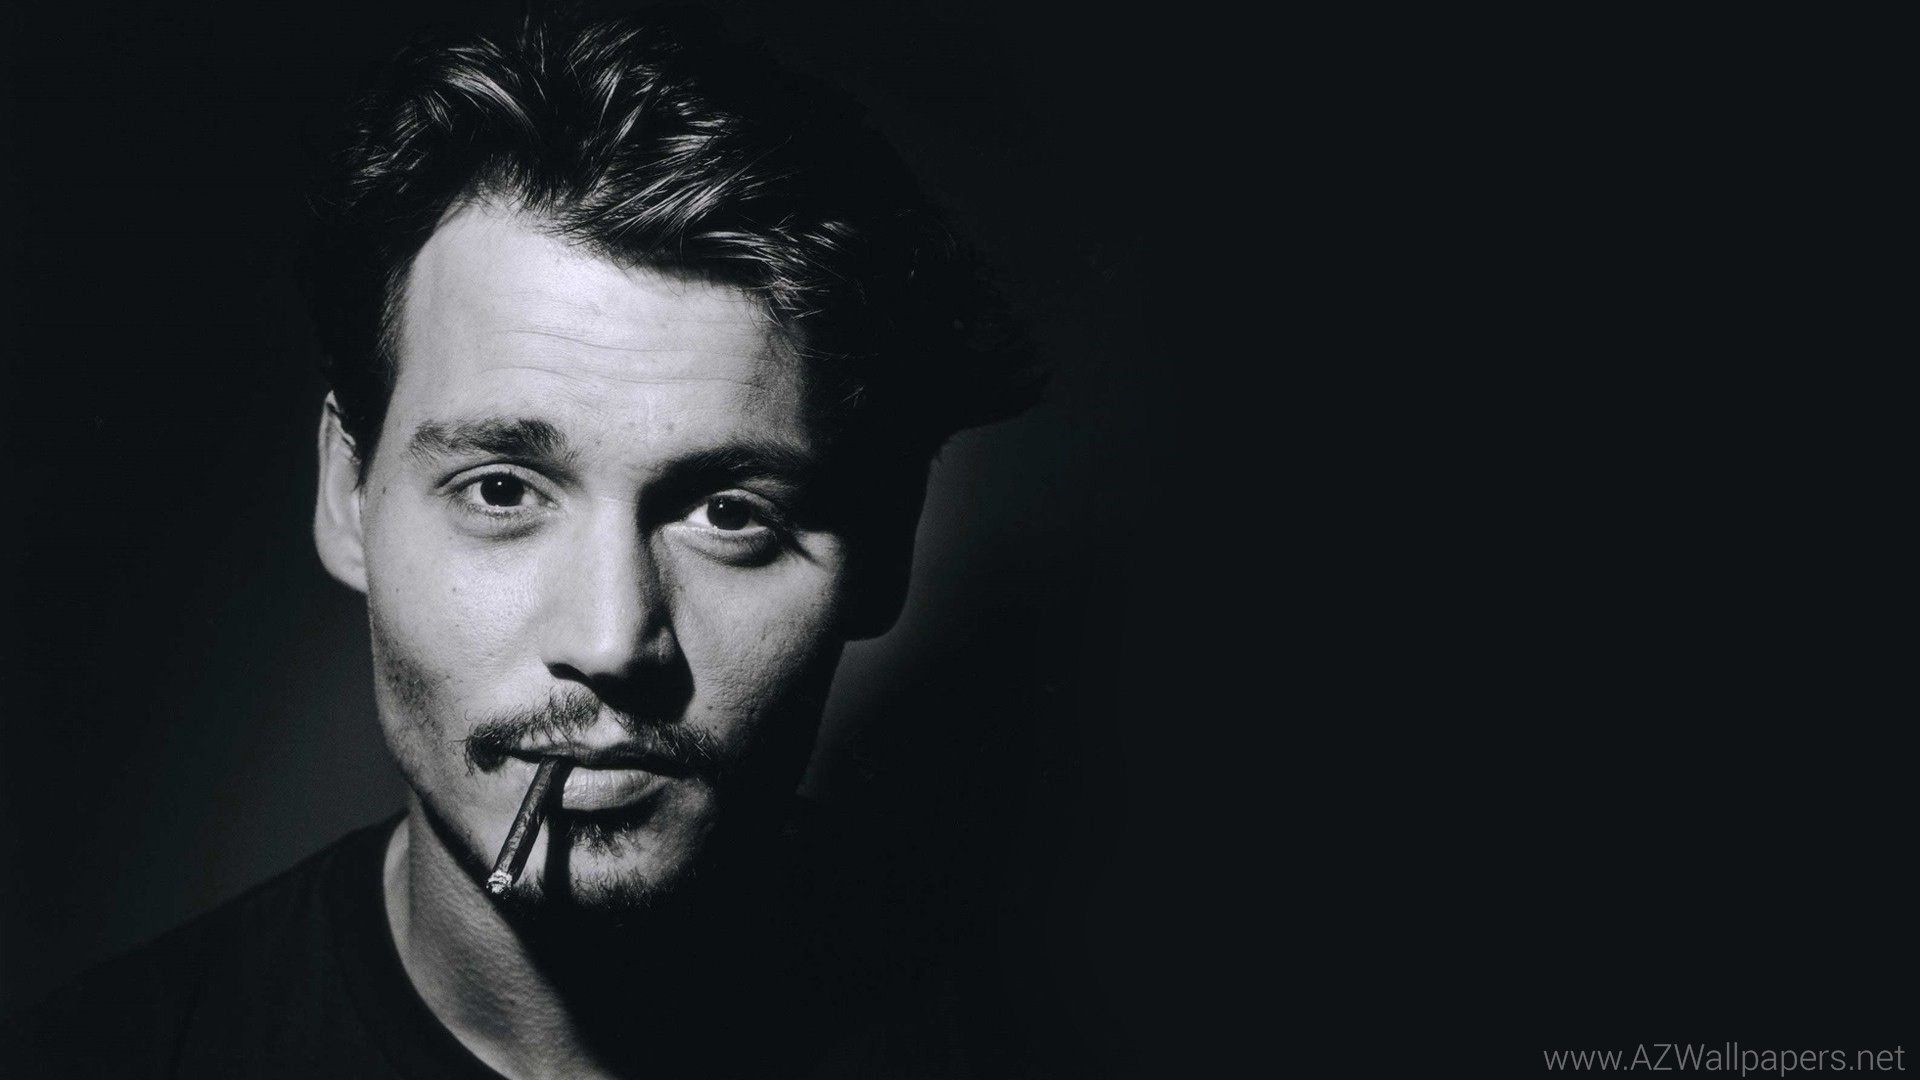 1920x1080 Johnny Depp Wallpapers 141 Widescreen Wallpapers ImgX Wallpapers .